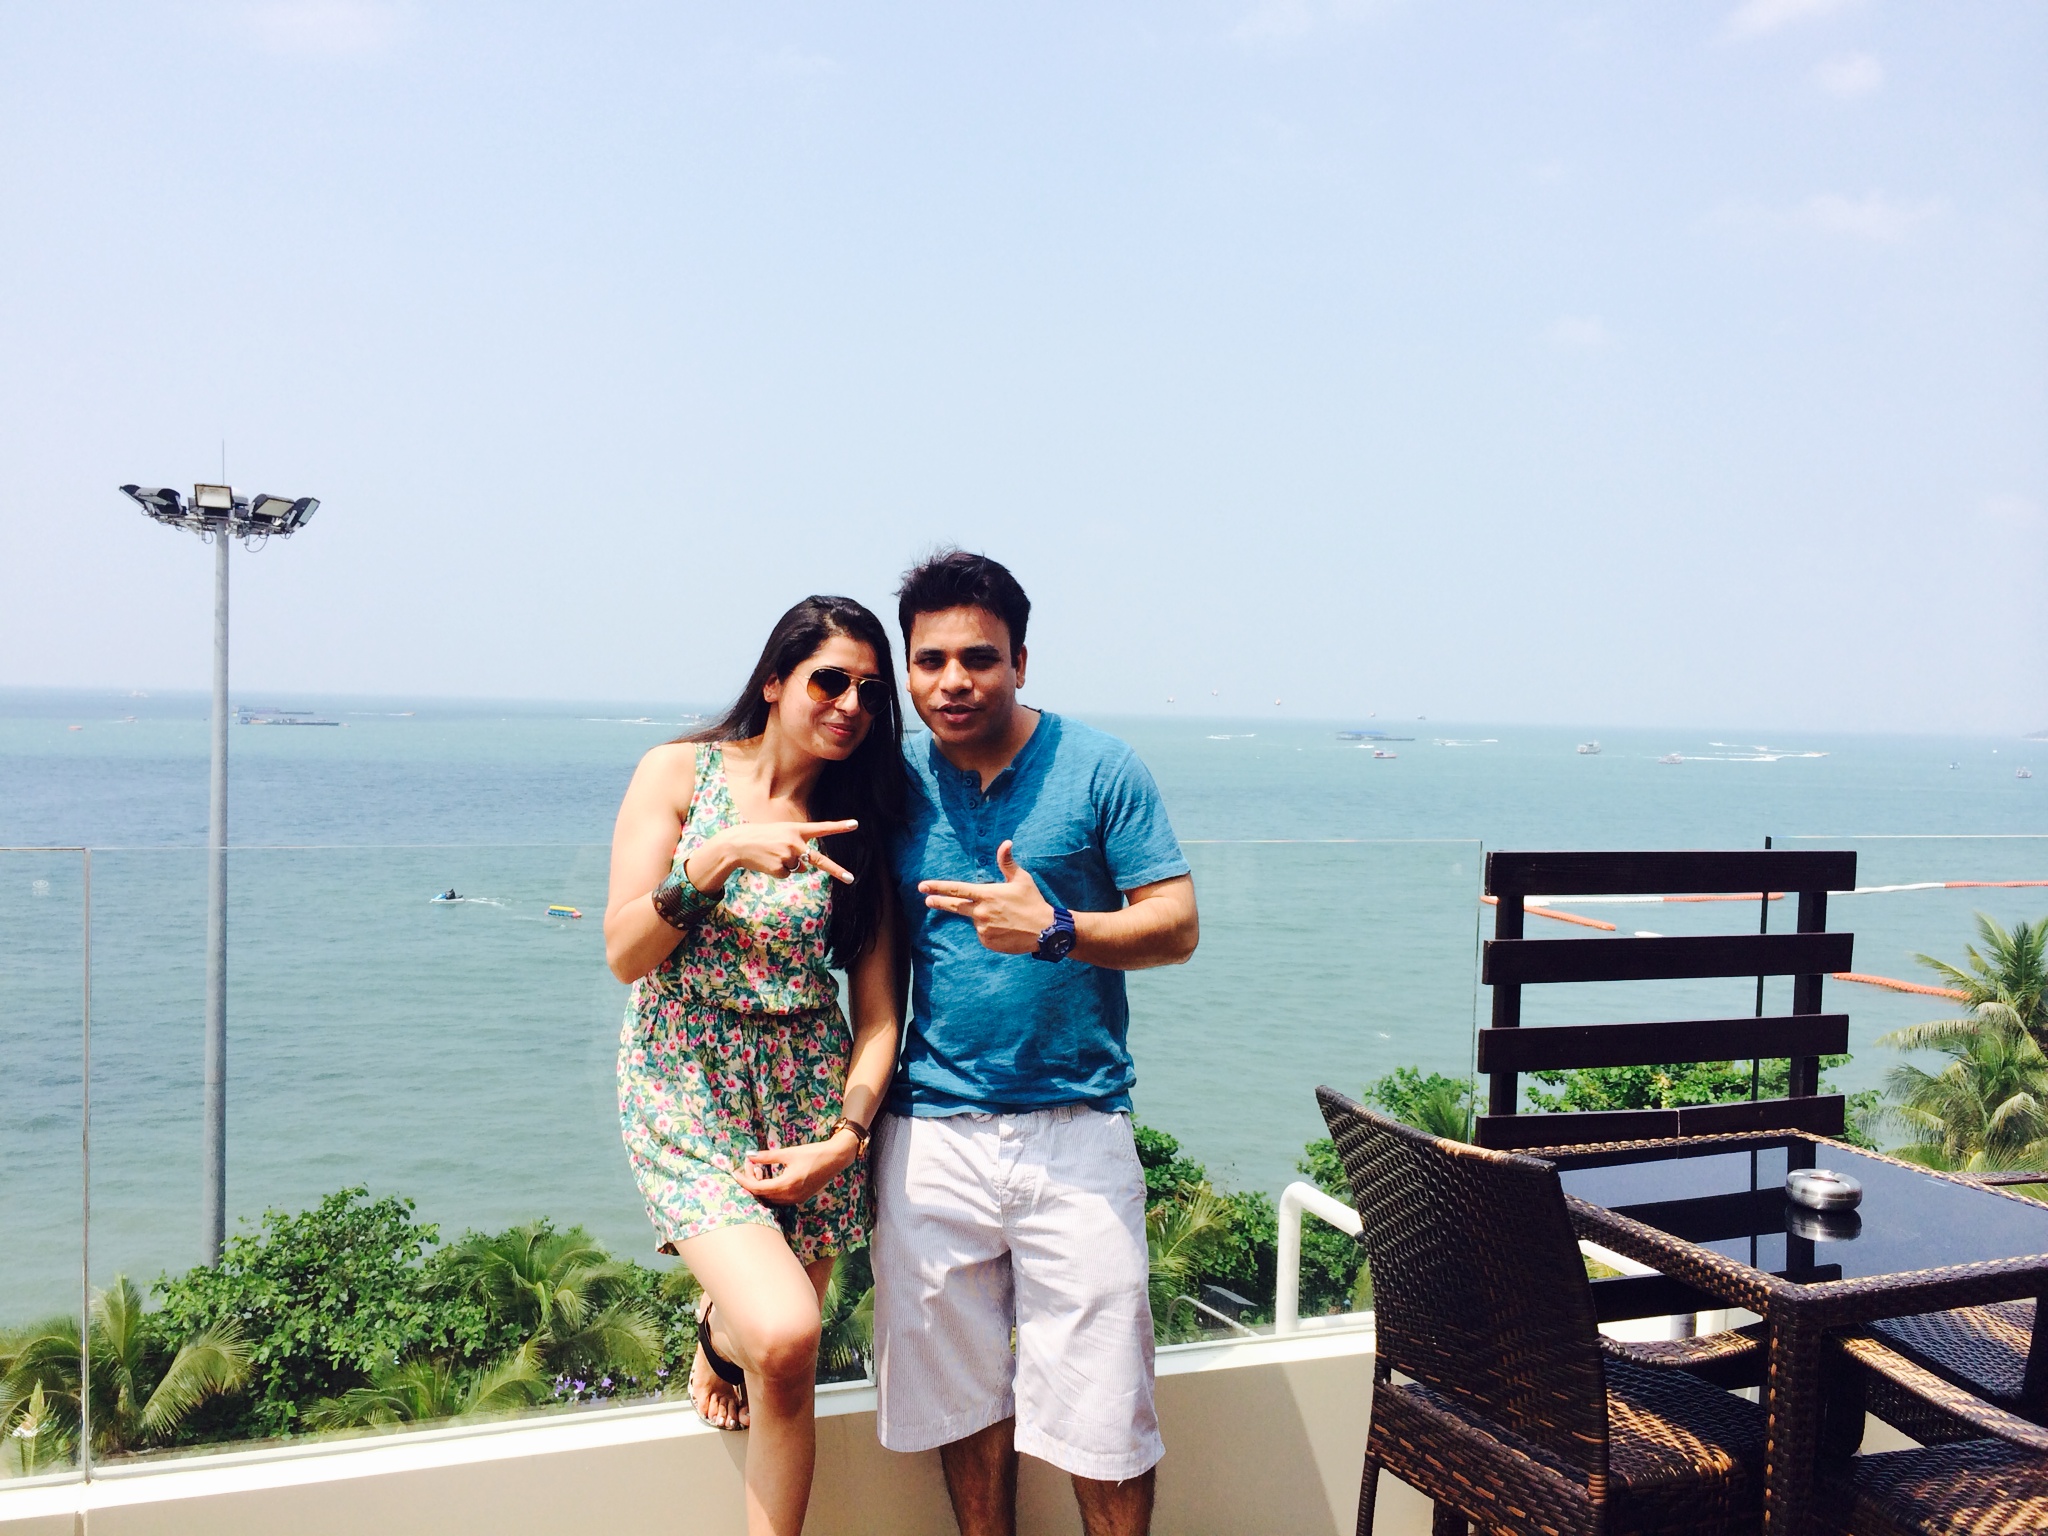 Day 1 & 2 - Short Trip To Pattaya With Sister : Thailand (Oct’14) 19